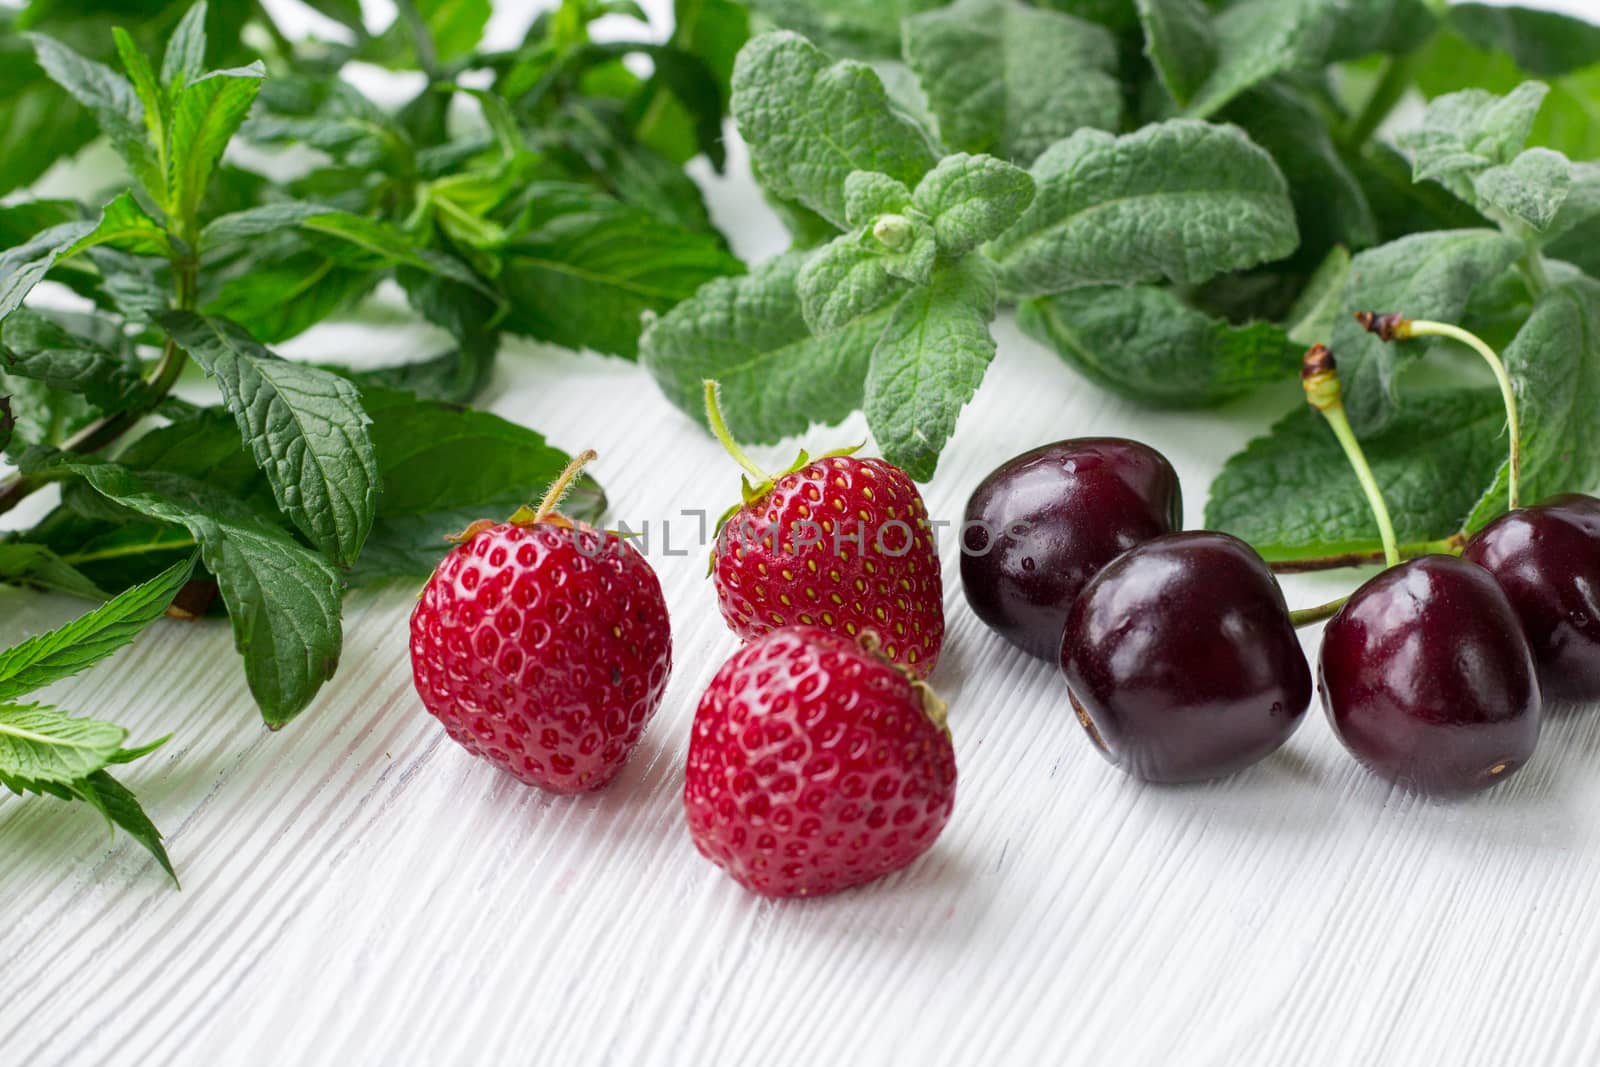 Vinous cherries, red strawberries with green herbal mix of fresh mint and melissa herbs on white wooden background